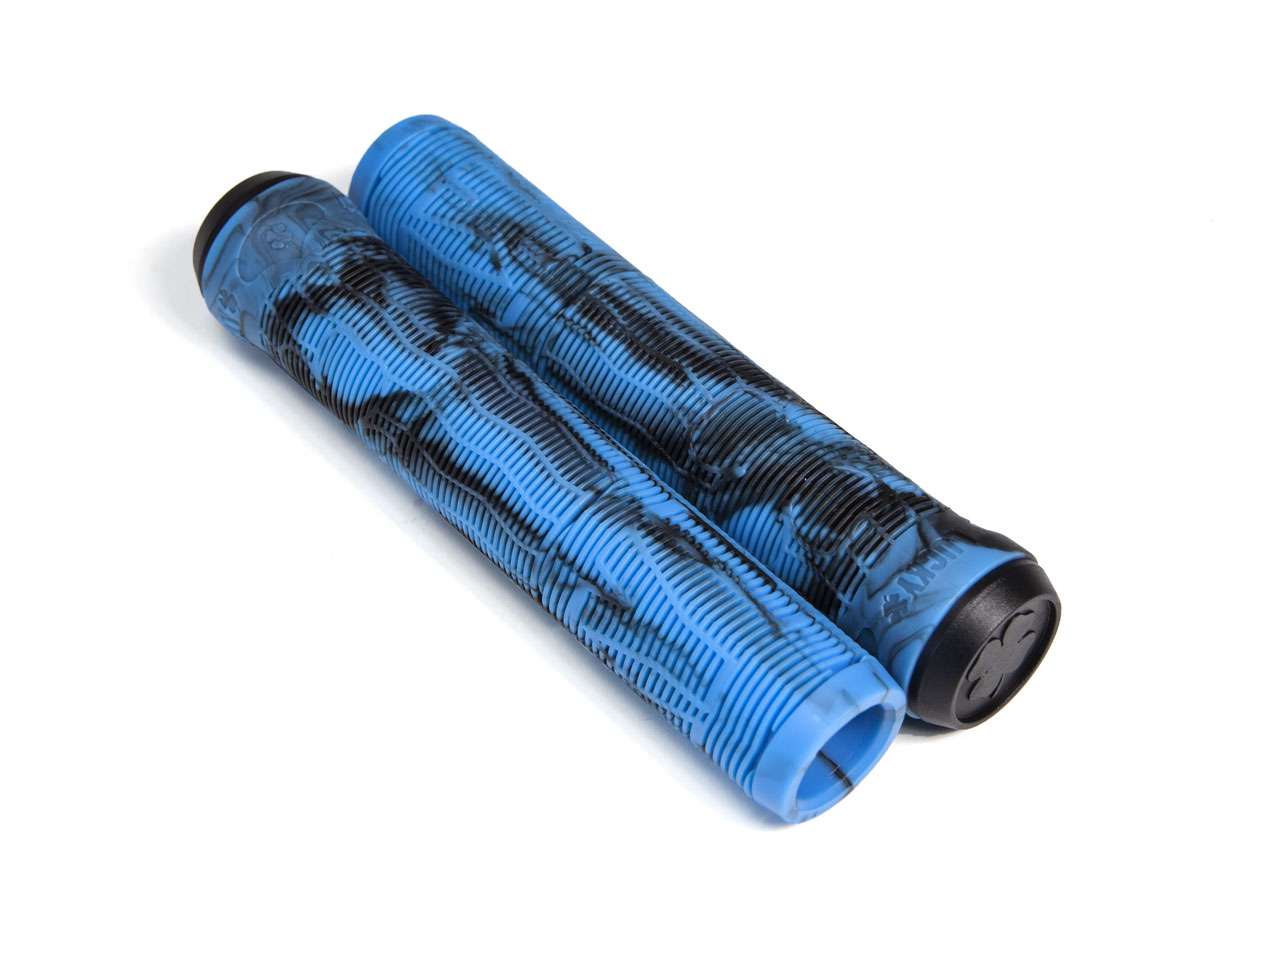 VICEGRIPS™ 2.0 Pro Scooter Grips Black/Blue